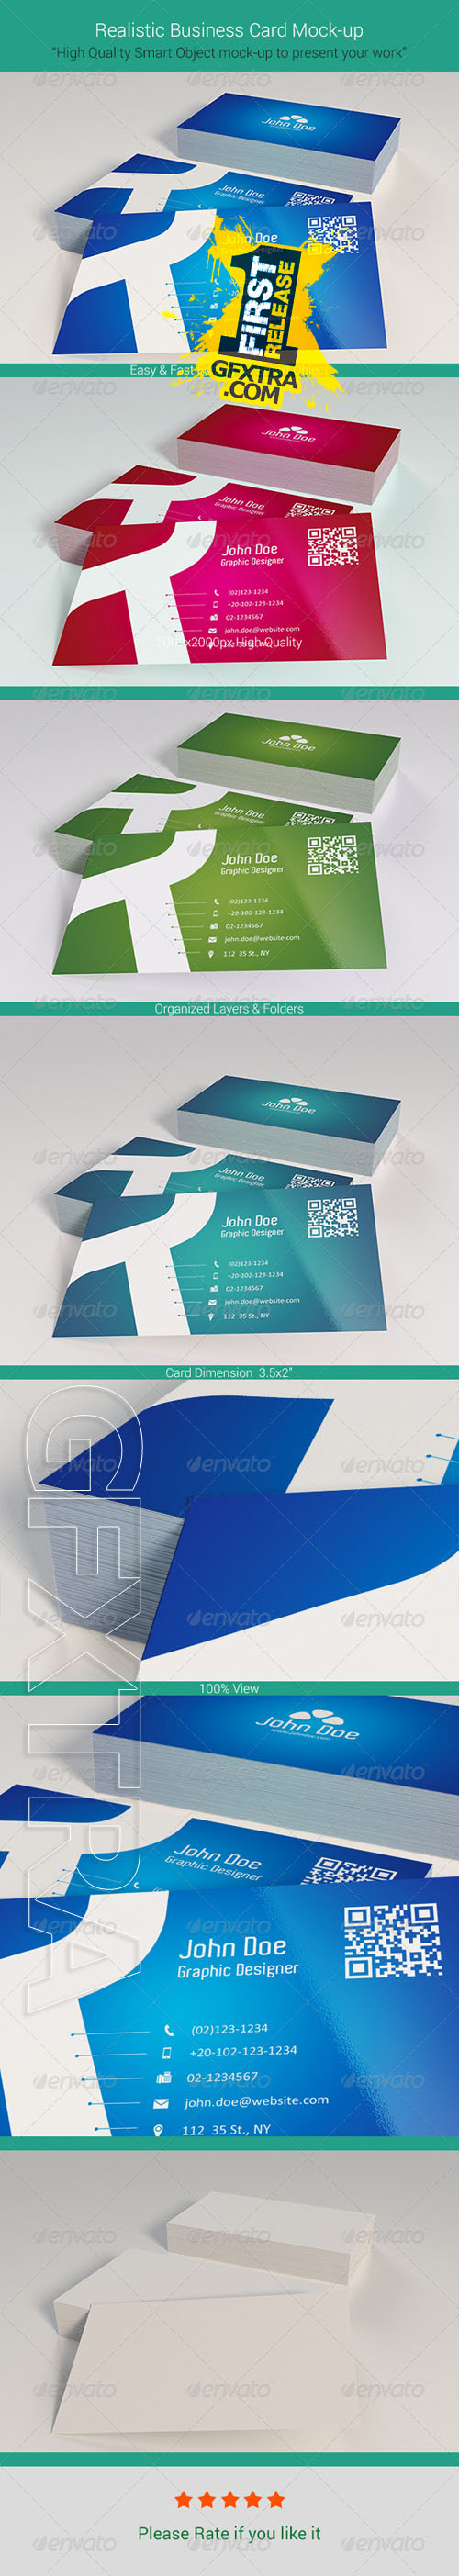 GraphicRiver - Realistic Business Card Mock-Up